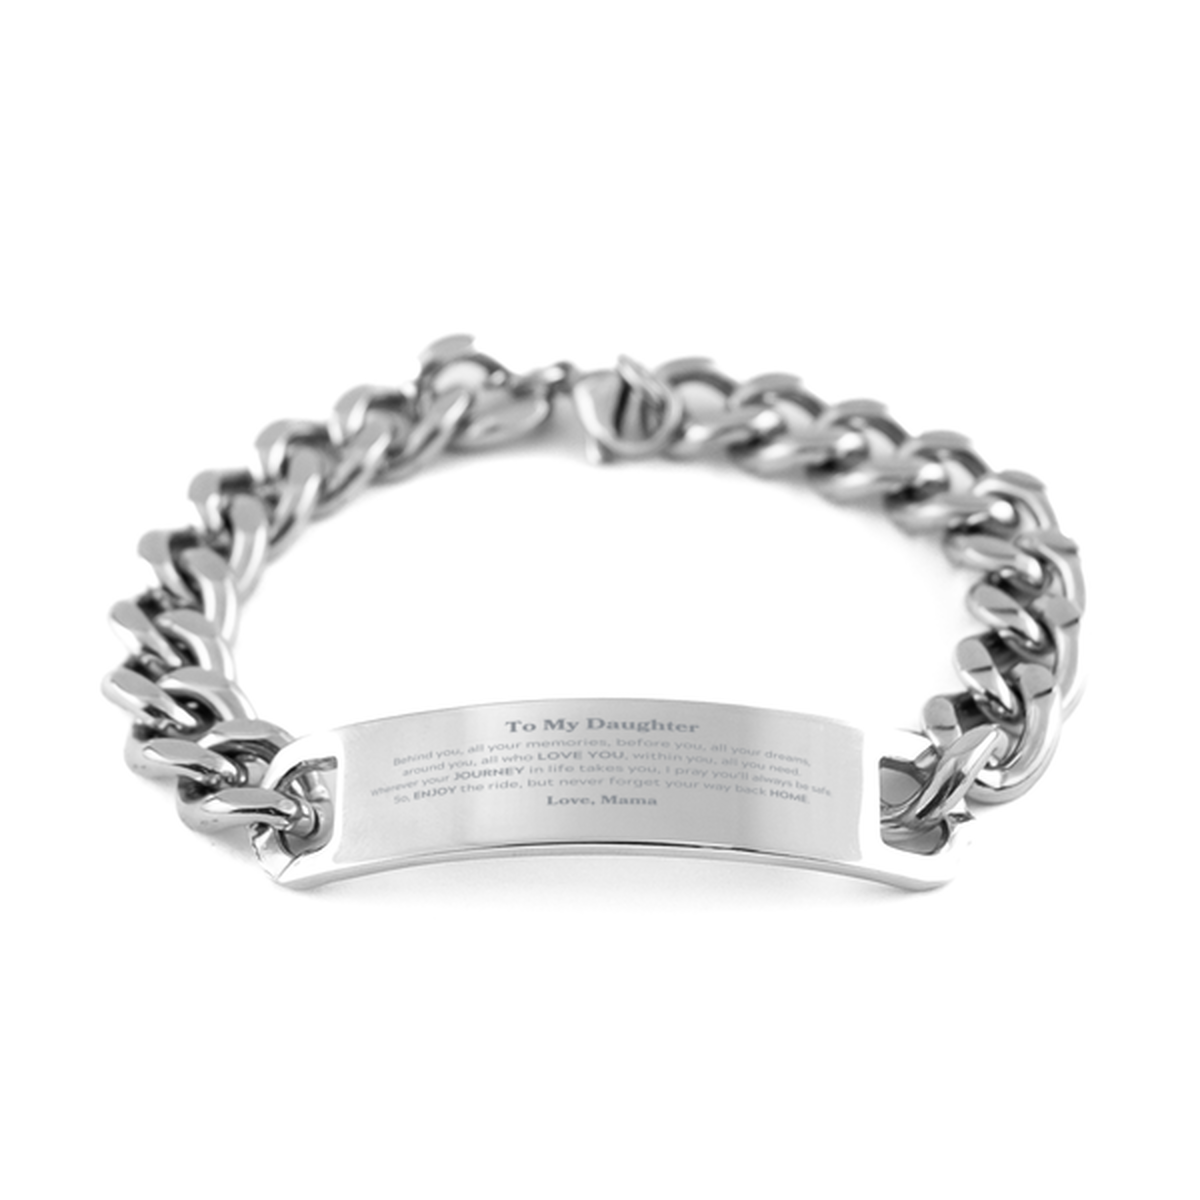 To My Daughter Graduation Gifts from Mama, Daughter Cuban Chain Stainless Steel Bracelet Christmas Birthday Gifts for Daughter Behind you, all your memories, before you, all your dreams. Love, Mama